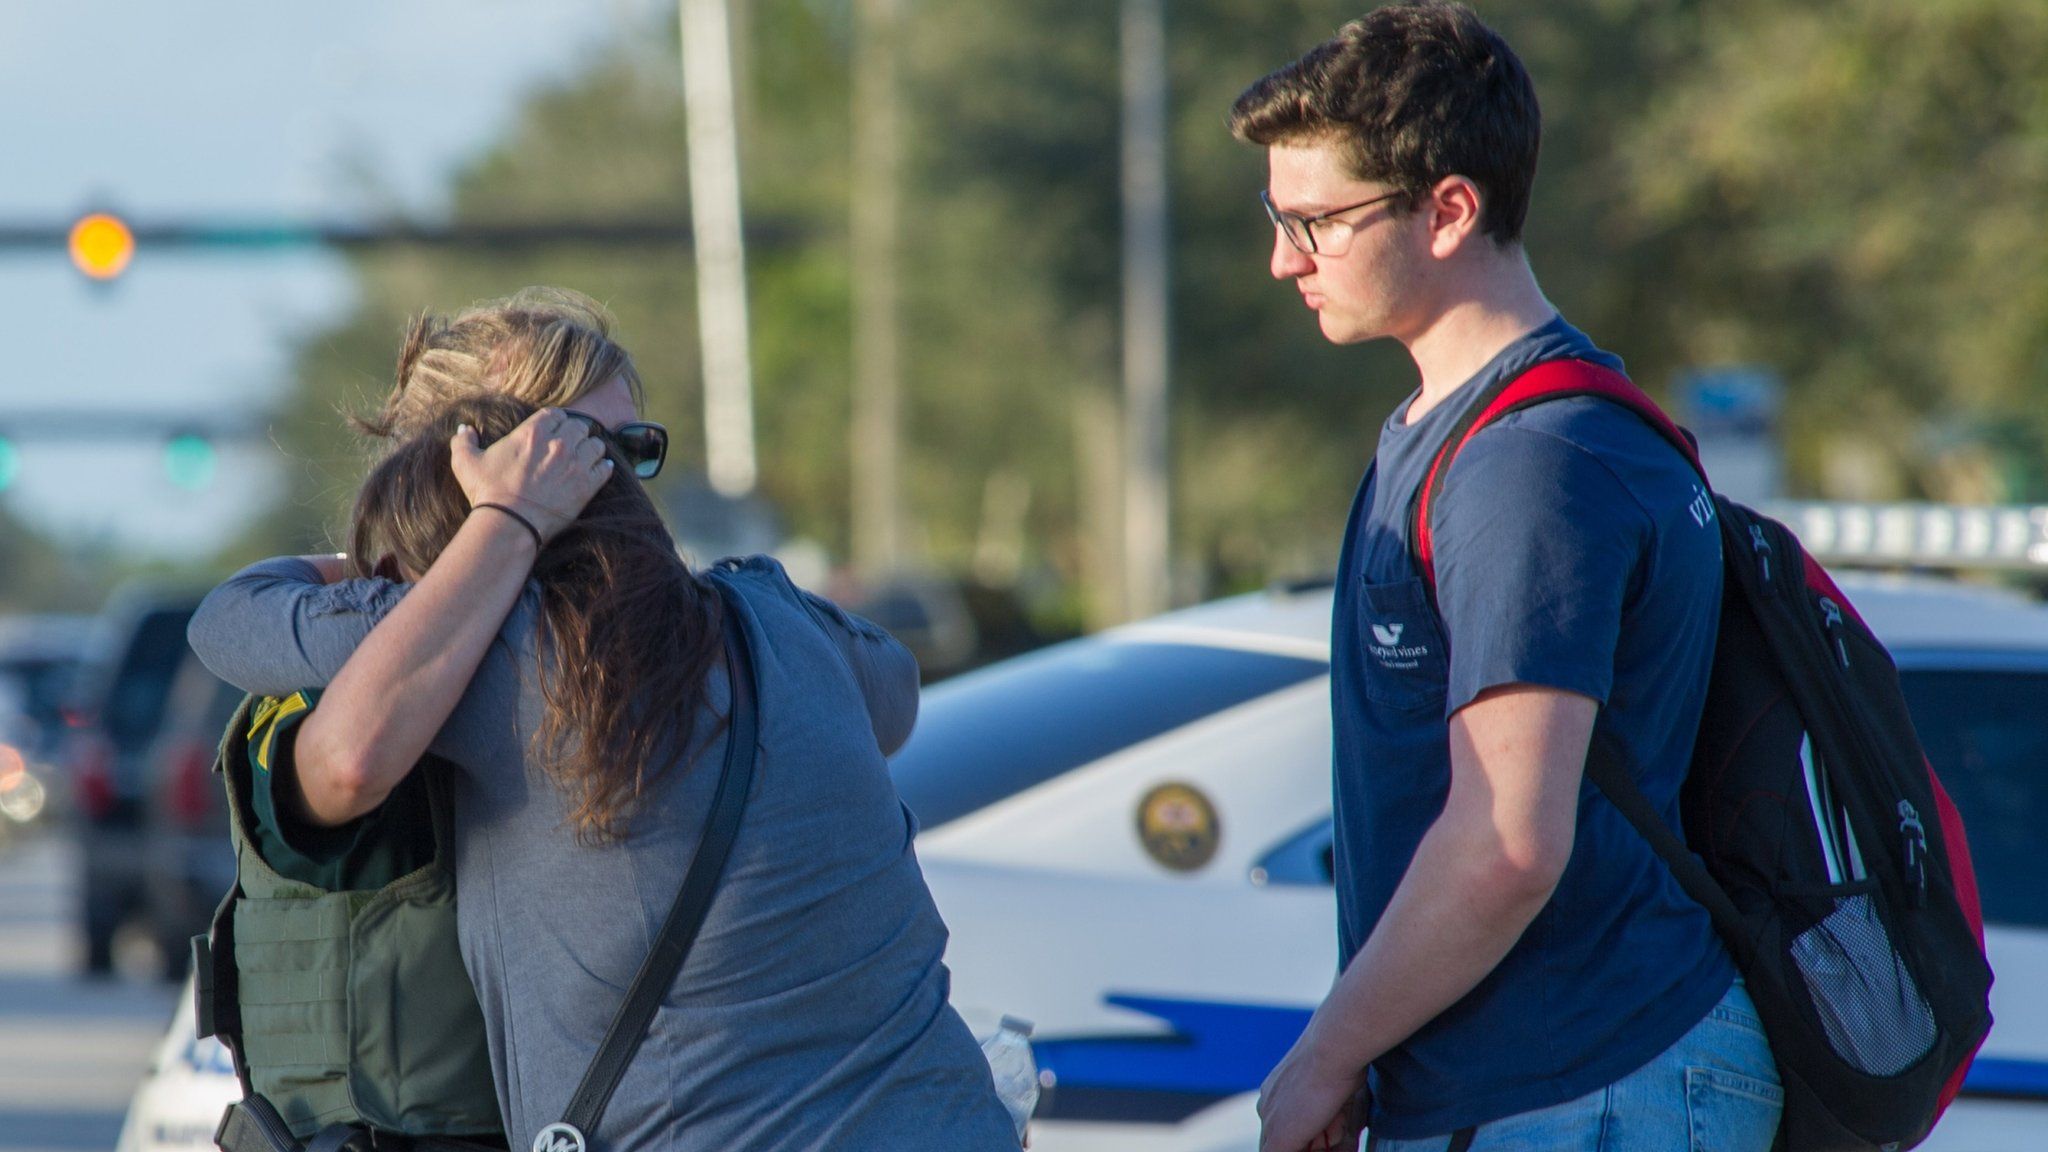 Woman comforted by police officer outside Marjory Stoneman Douglas High School in Parkland, Florida, on 14 February 2018